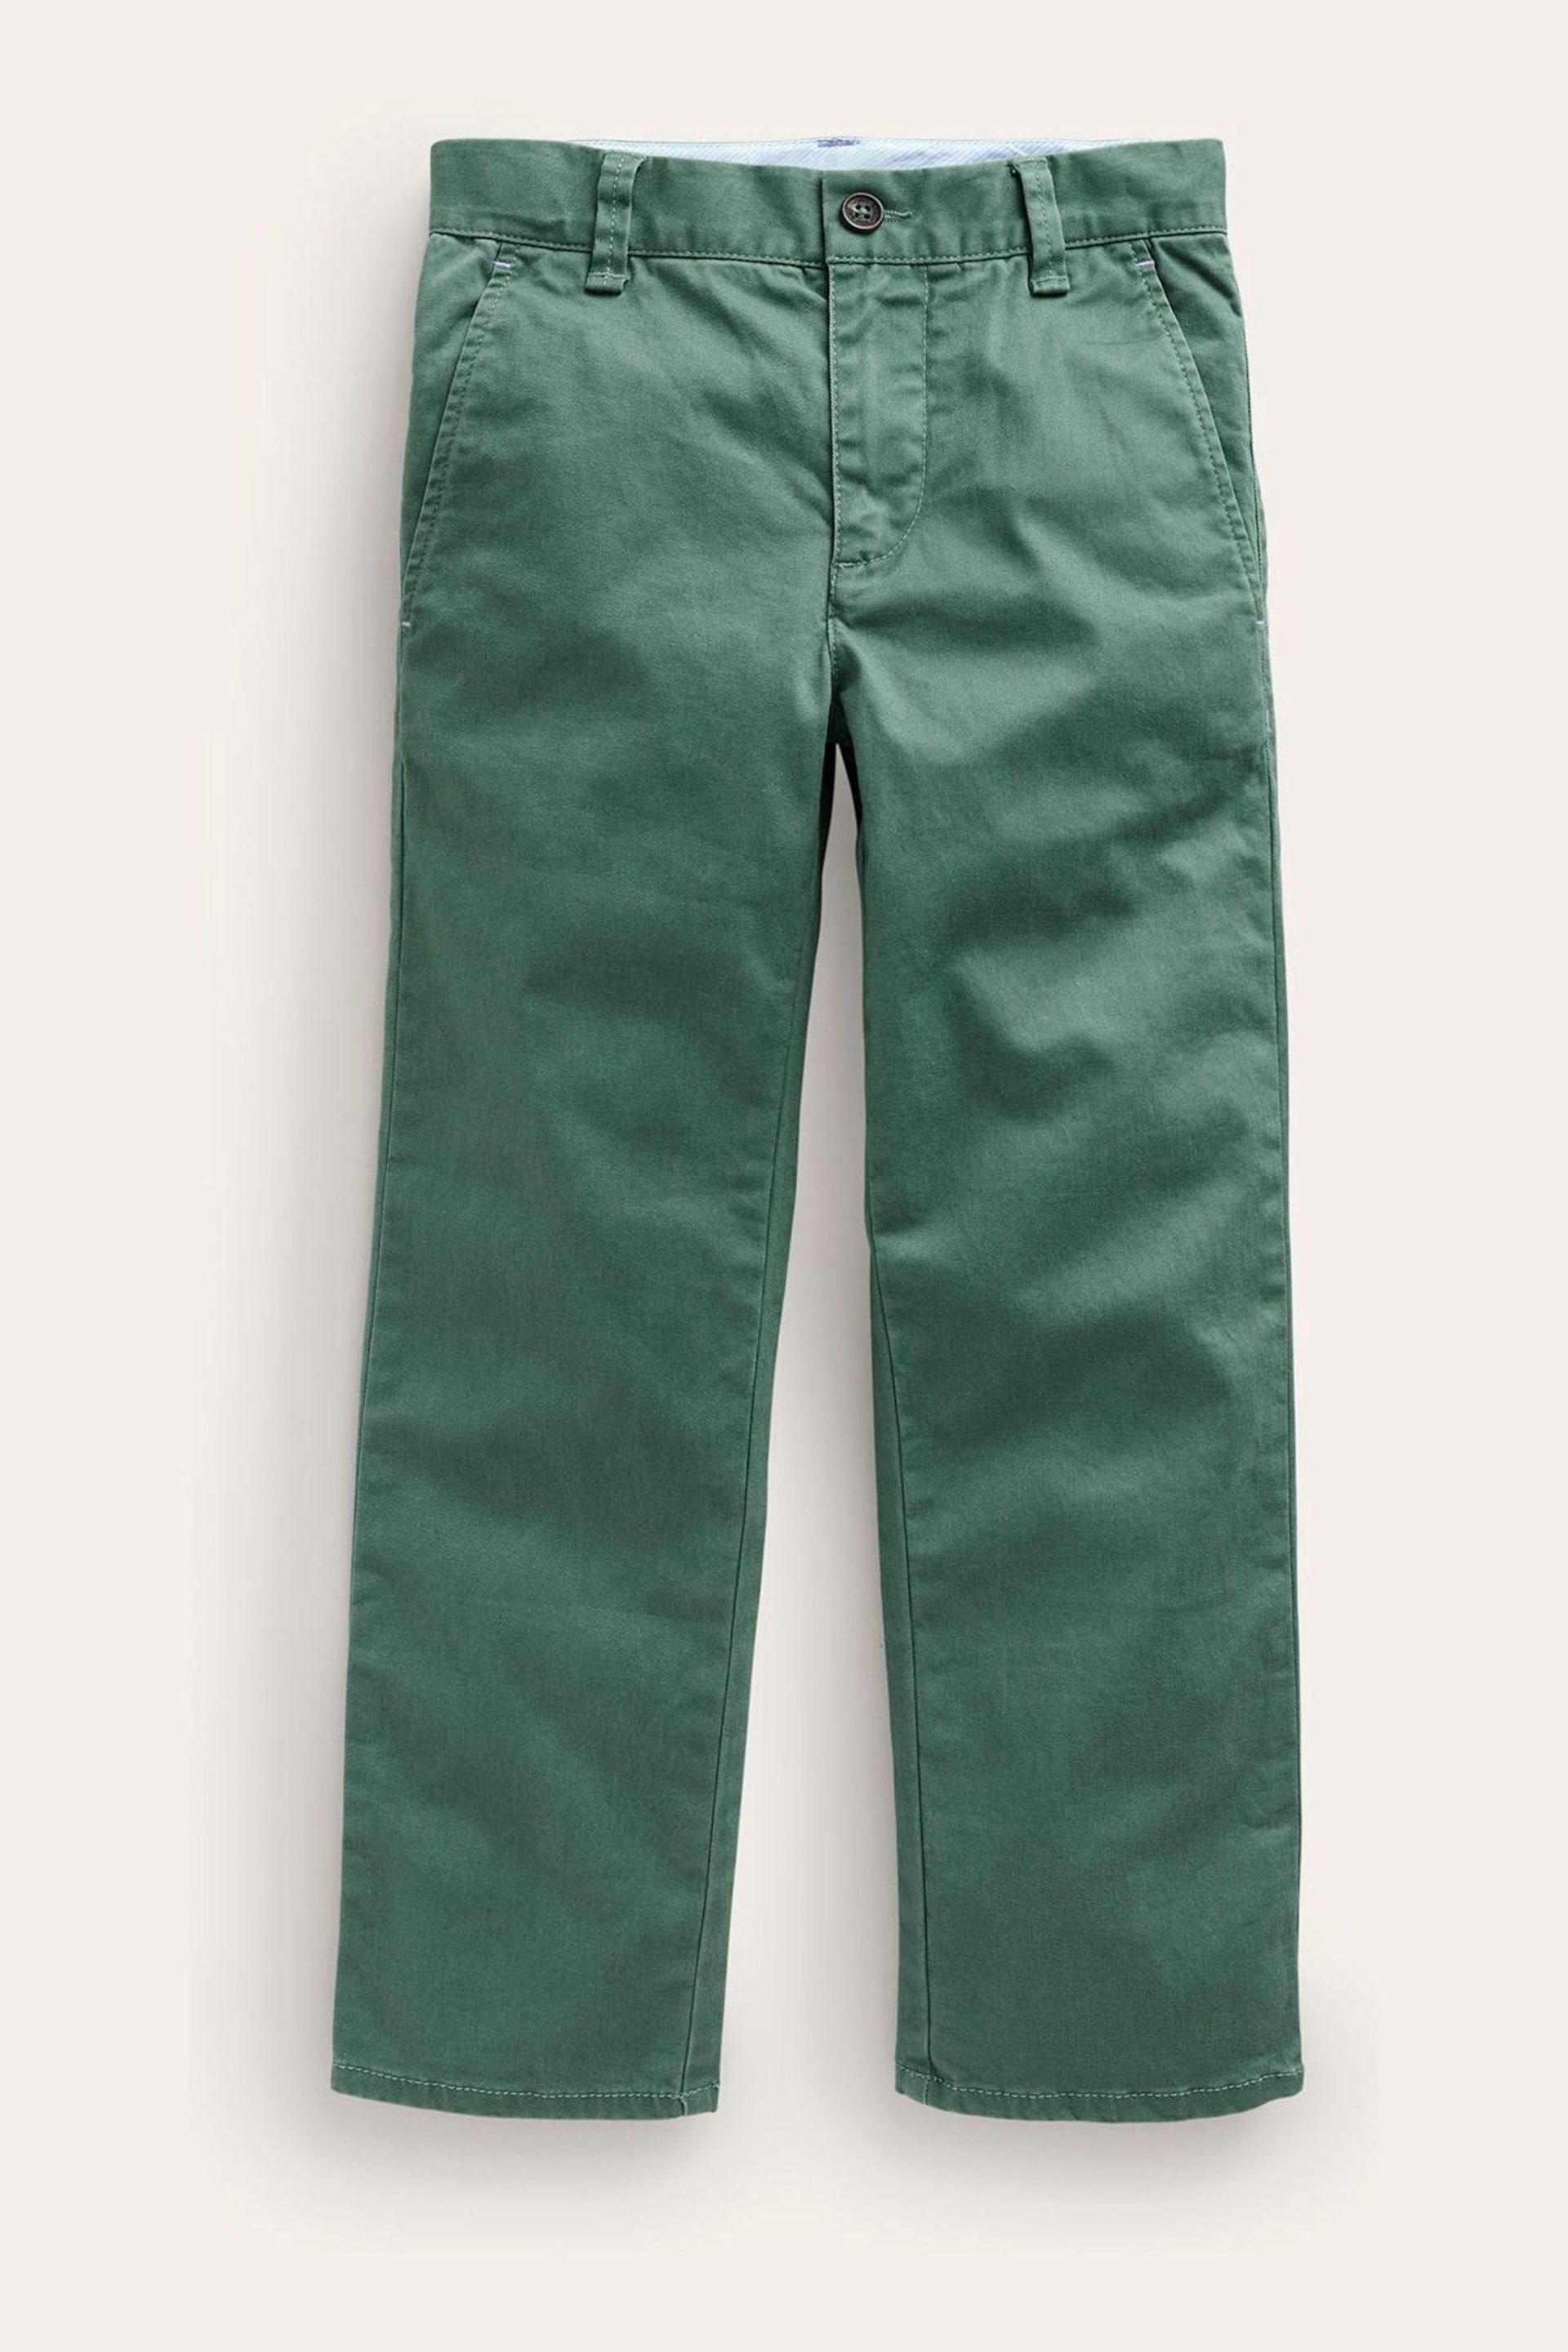 Boden Green Classic Trousers - Image 2 of 4